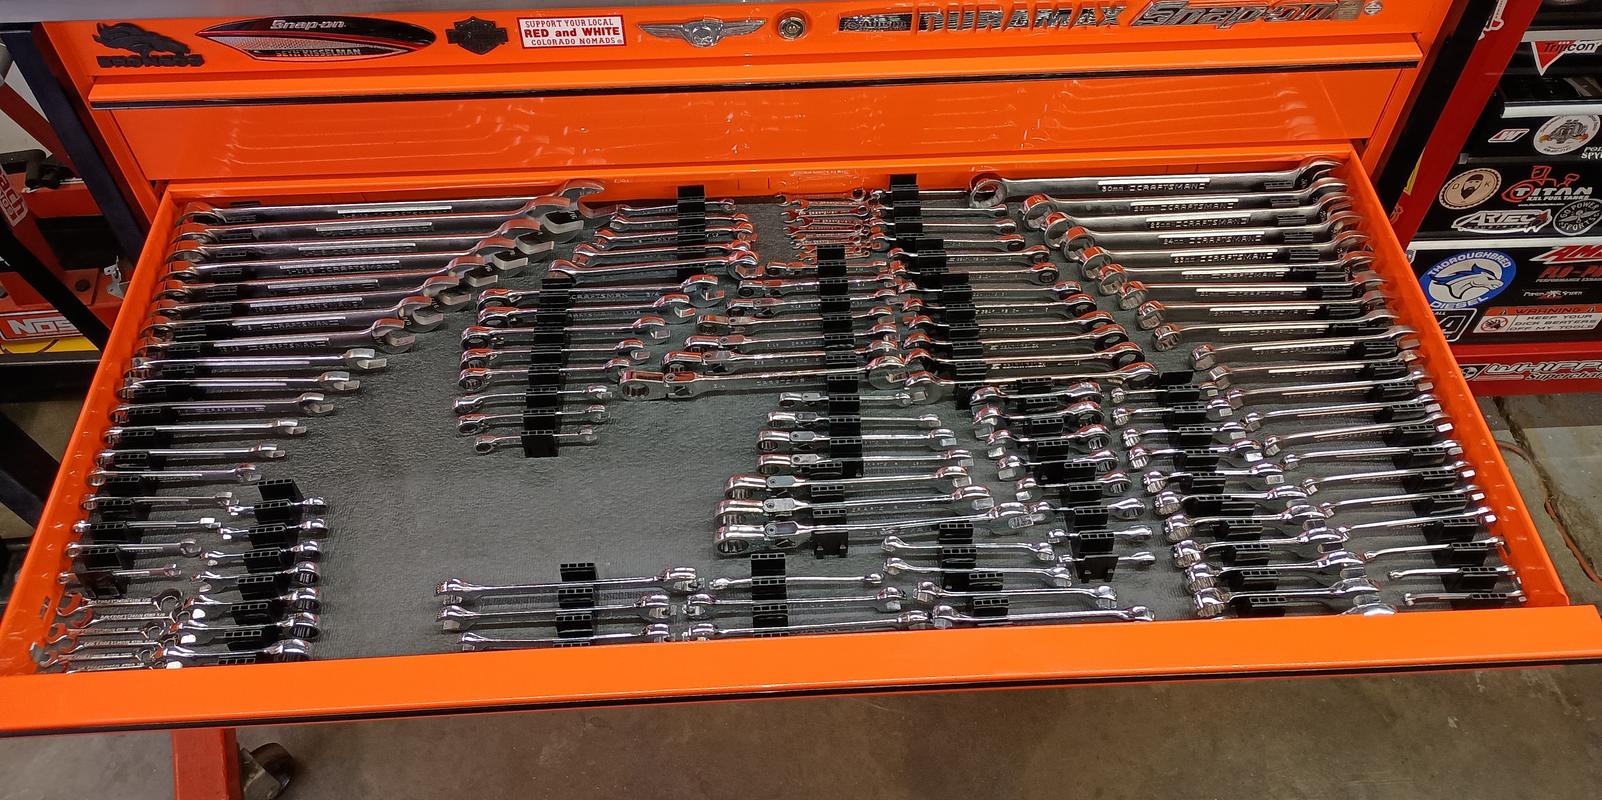 Wrench Holders for 11-Compartment Organizer - Milwaukee / Other Brands  (OEW-11S and OEW-11M)